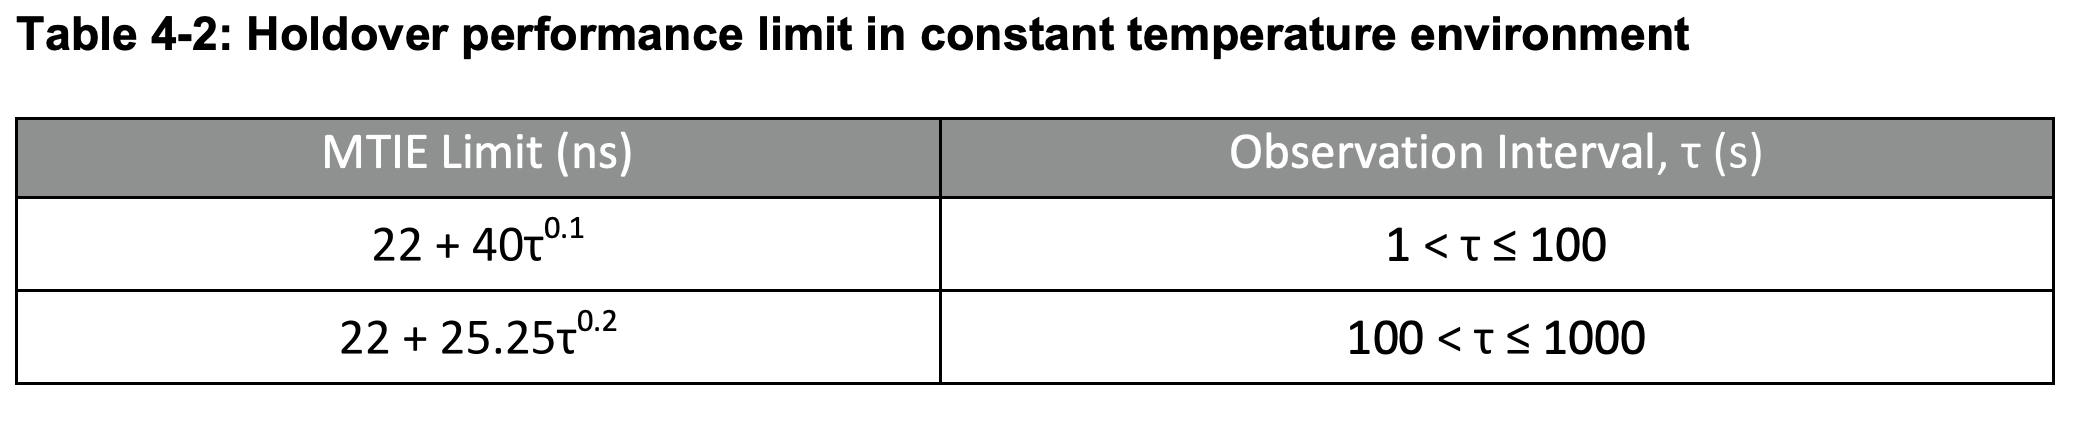 Table 4-2 Holdover performance limit in constant temperature environment